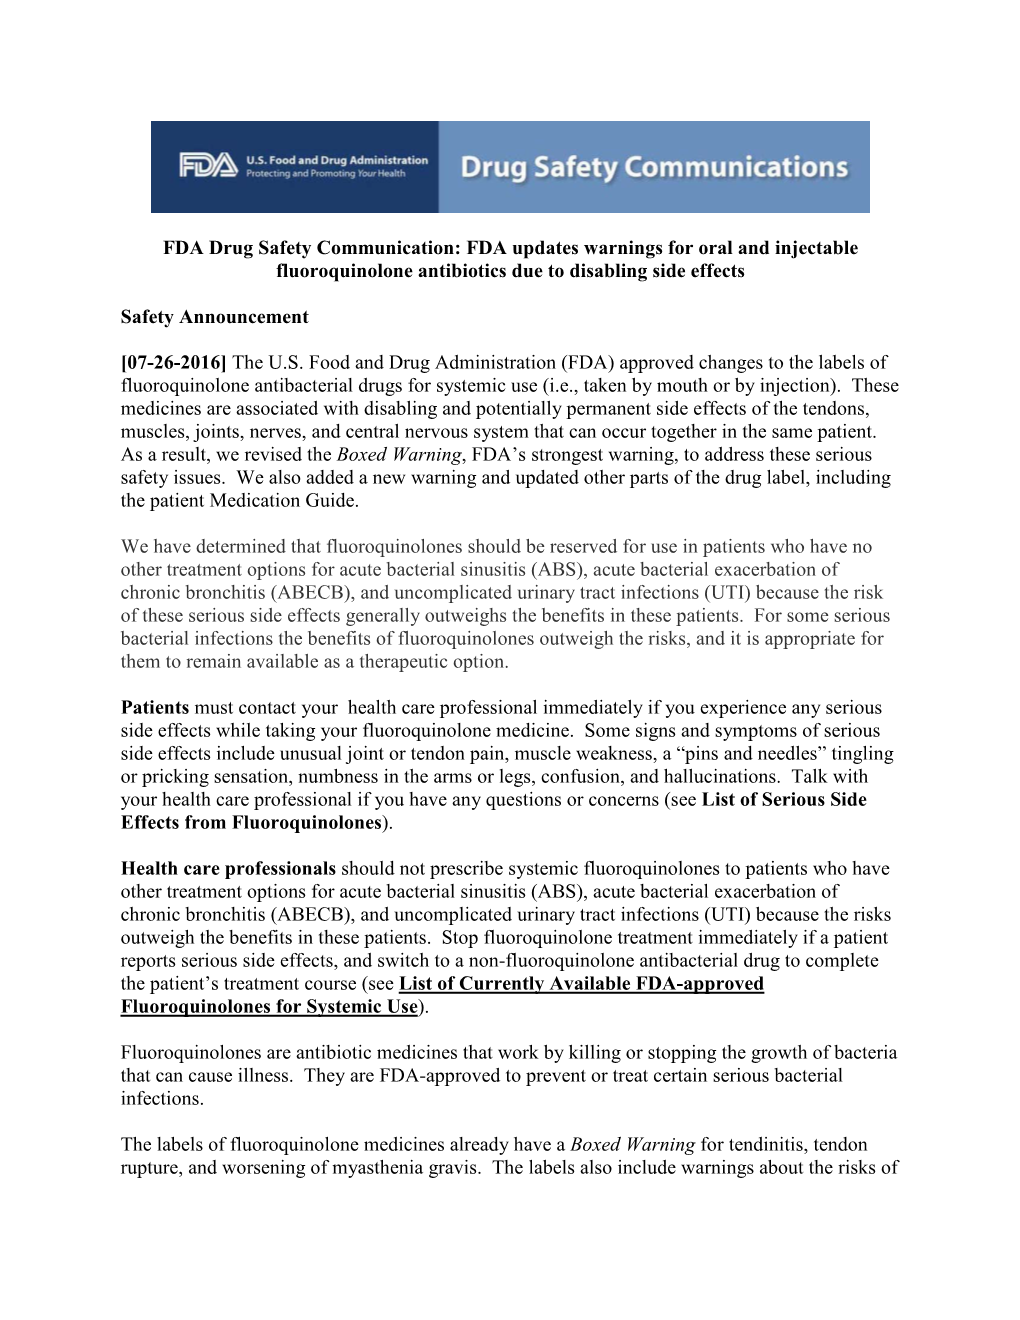 FDA Drug Safety Communication: FDA Updates Warnings for Oral and Injectable Fluoroquinolone Antibiotics Due to Disabling Side Effects